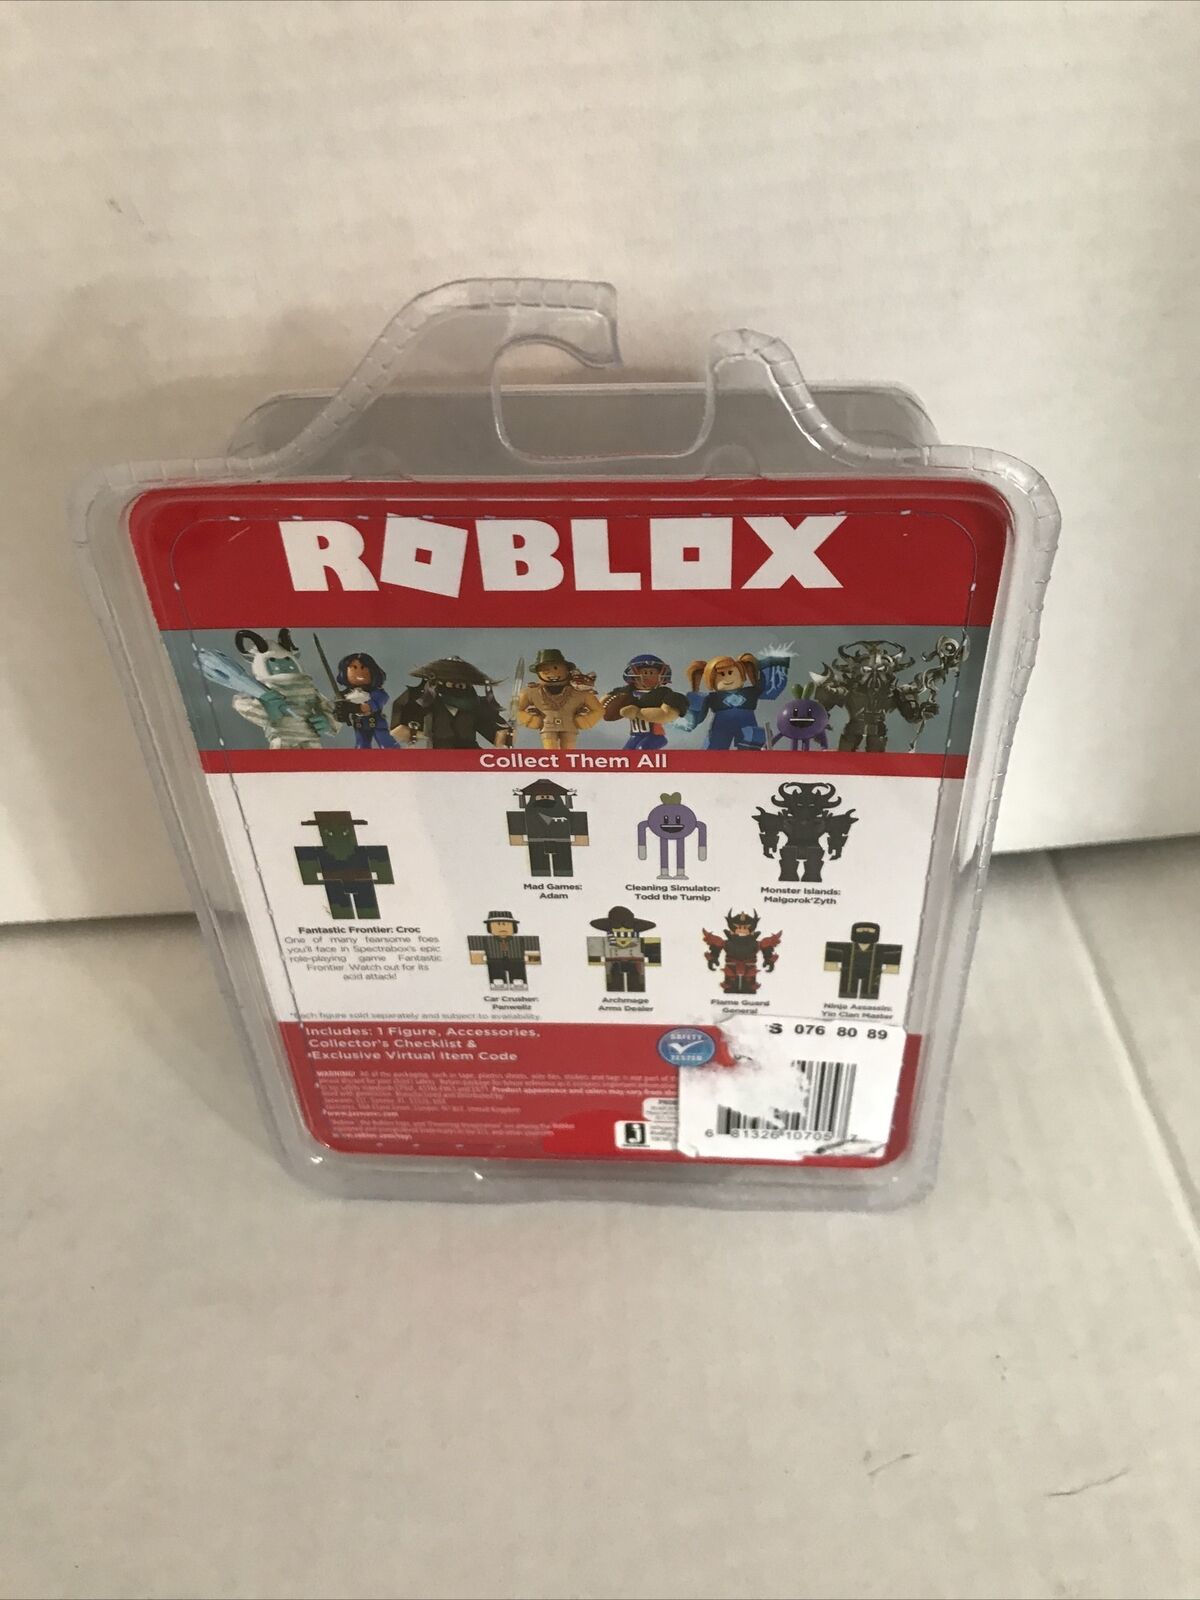 Roblox Fantastic Frontier Croc New With And 50 Similar Items - roblox cleaning simulator chris figure